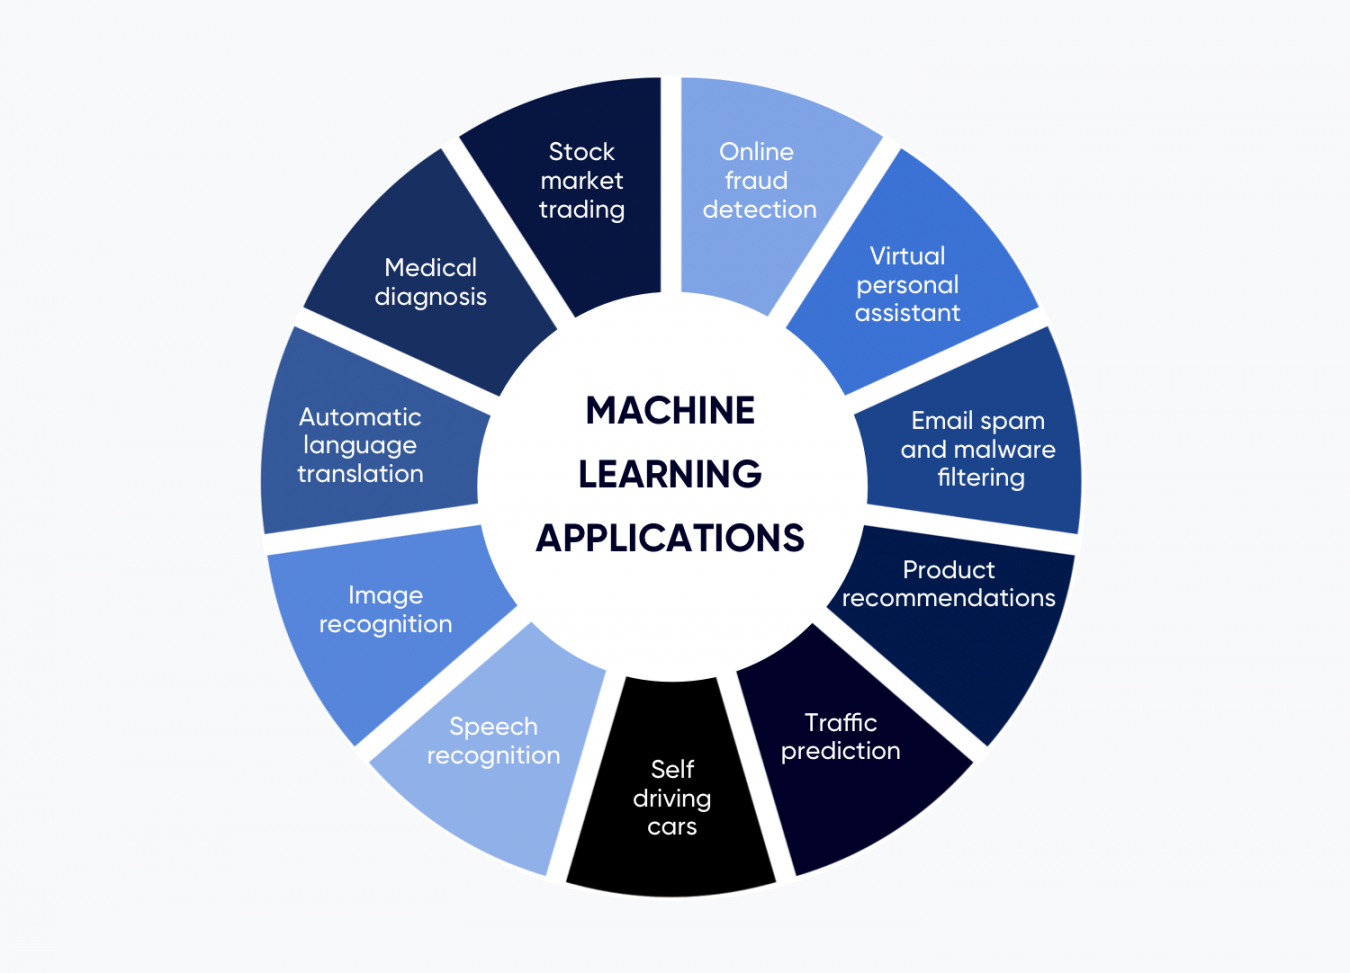 definition of machine learning in research